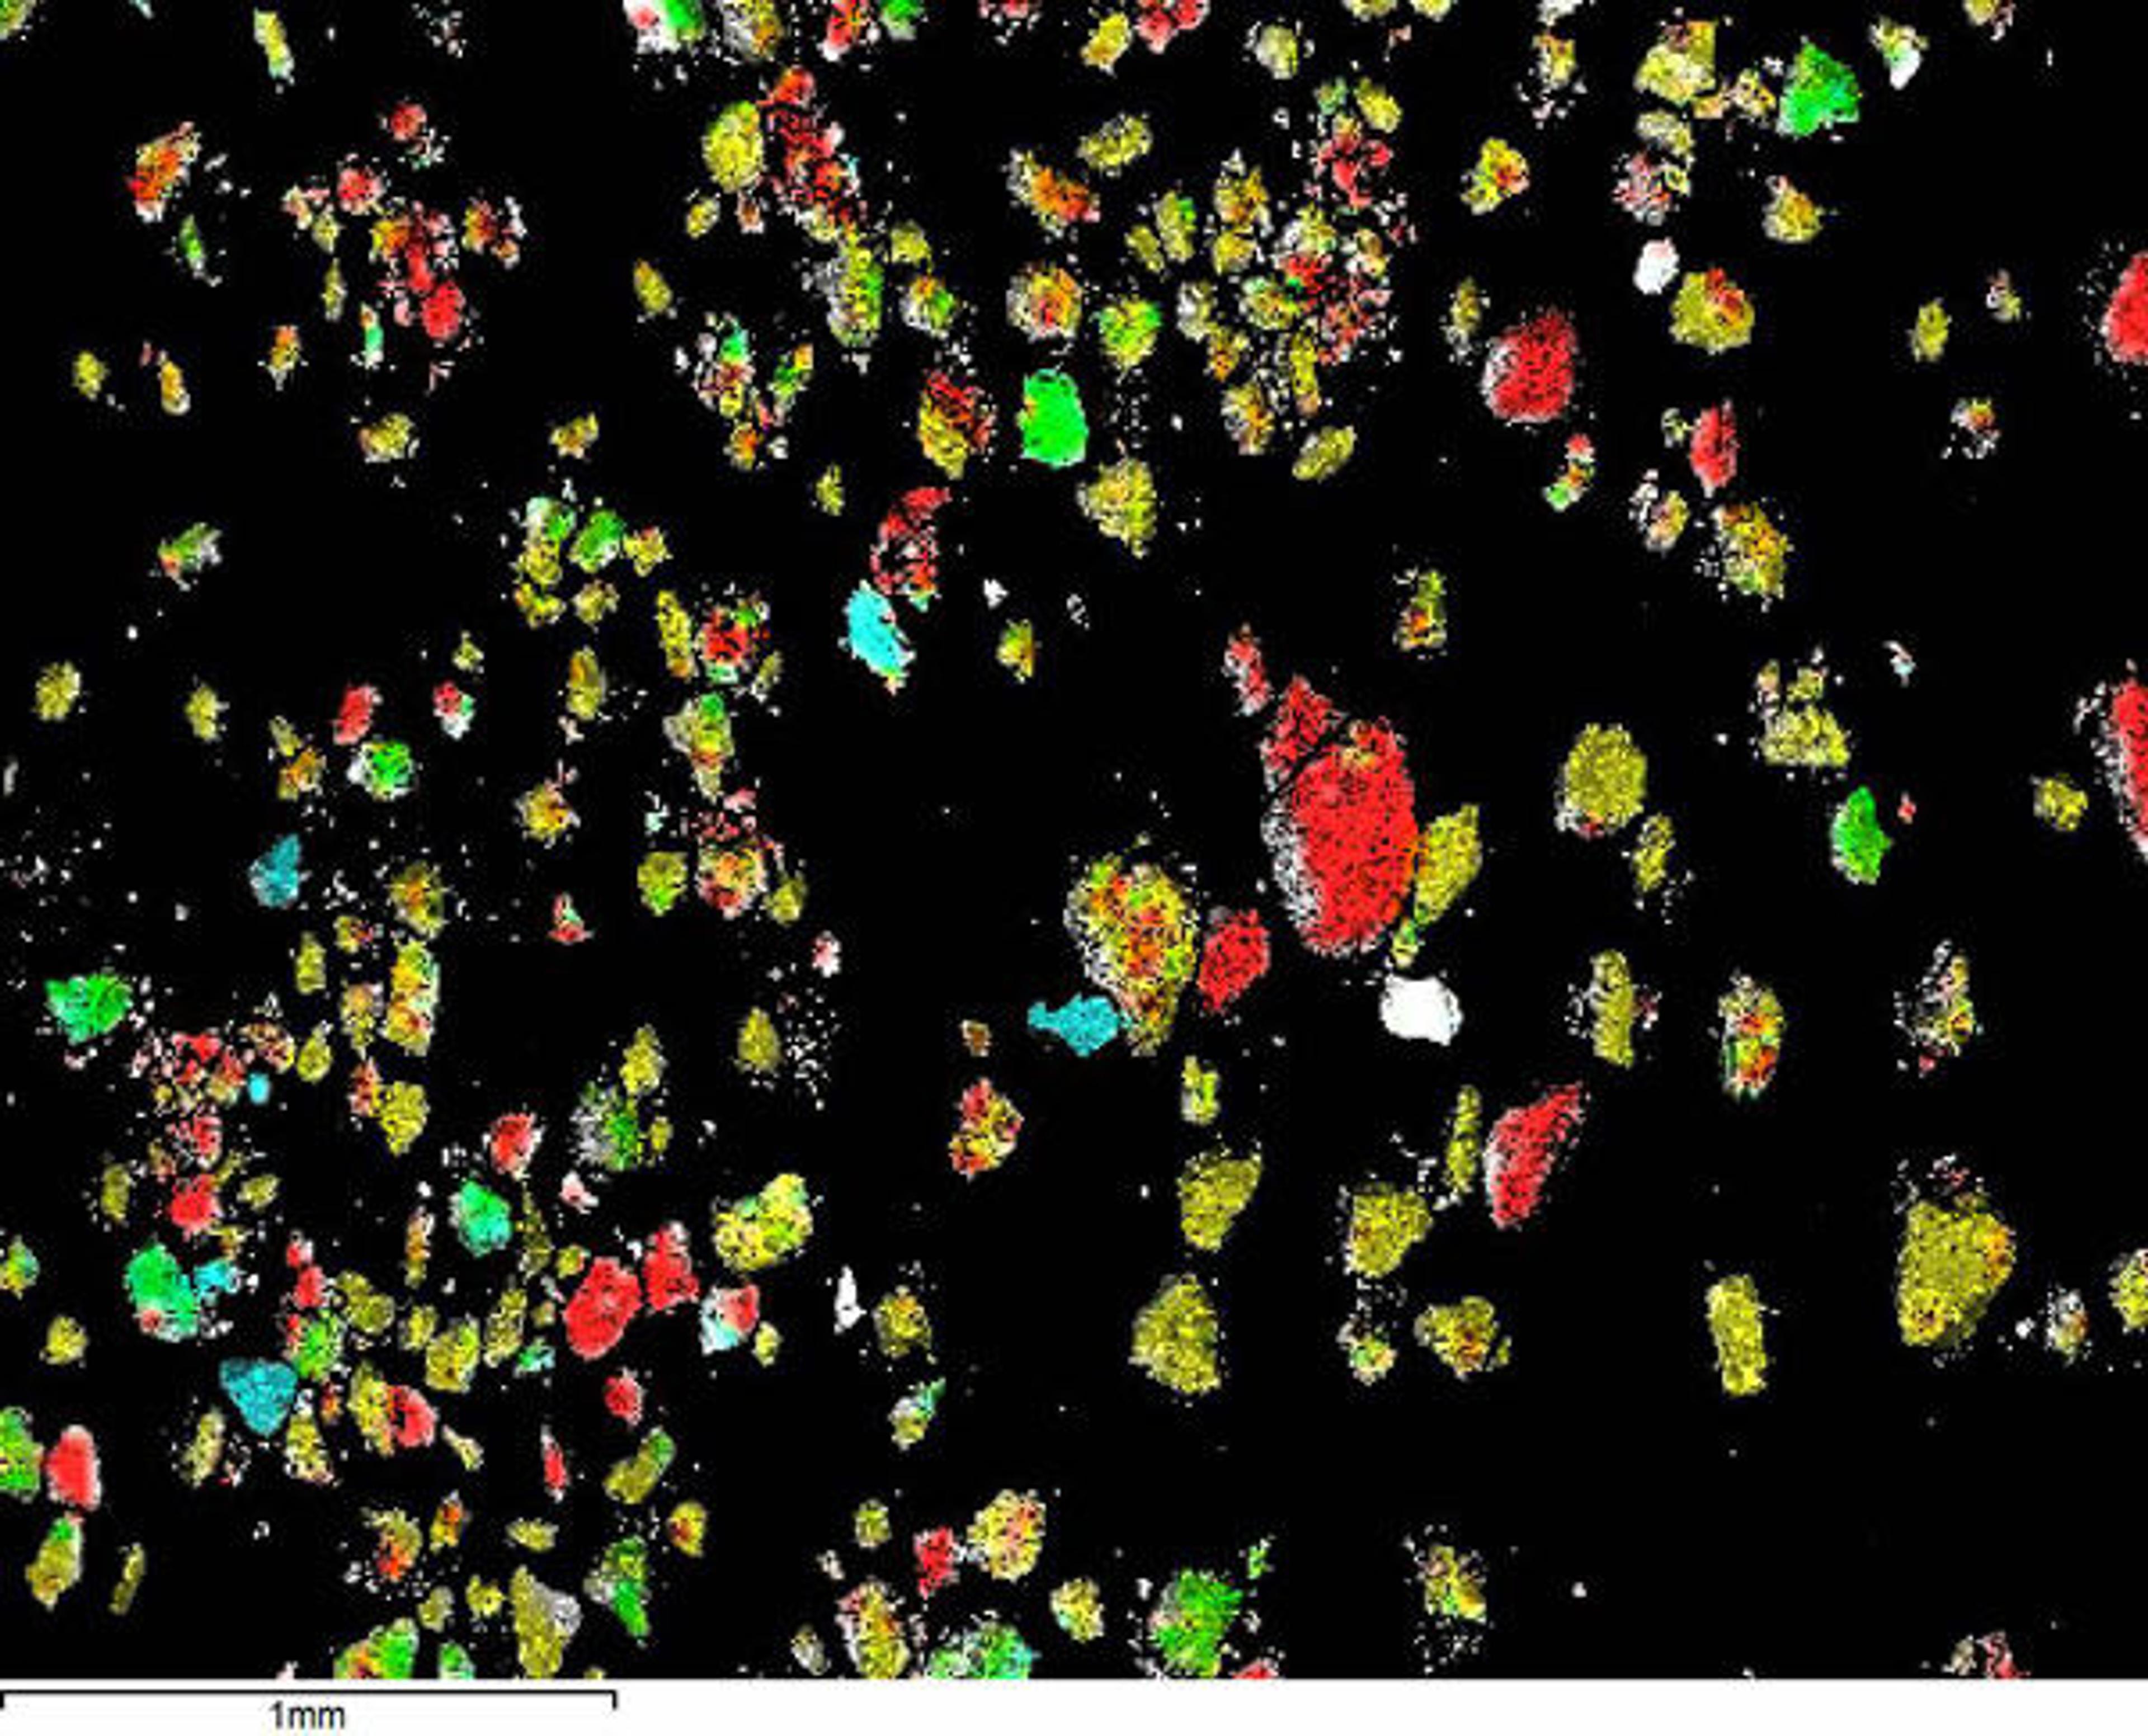 Fig. 5. An X-ray elemental map showing the distribution of aluminum (Al, yellow), silicon (Si, blue), and calcium (Ca, red) in the abrasive sample. The yellow particles are corundum fragments.